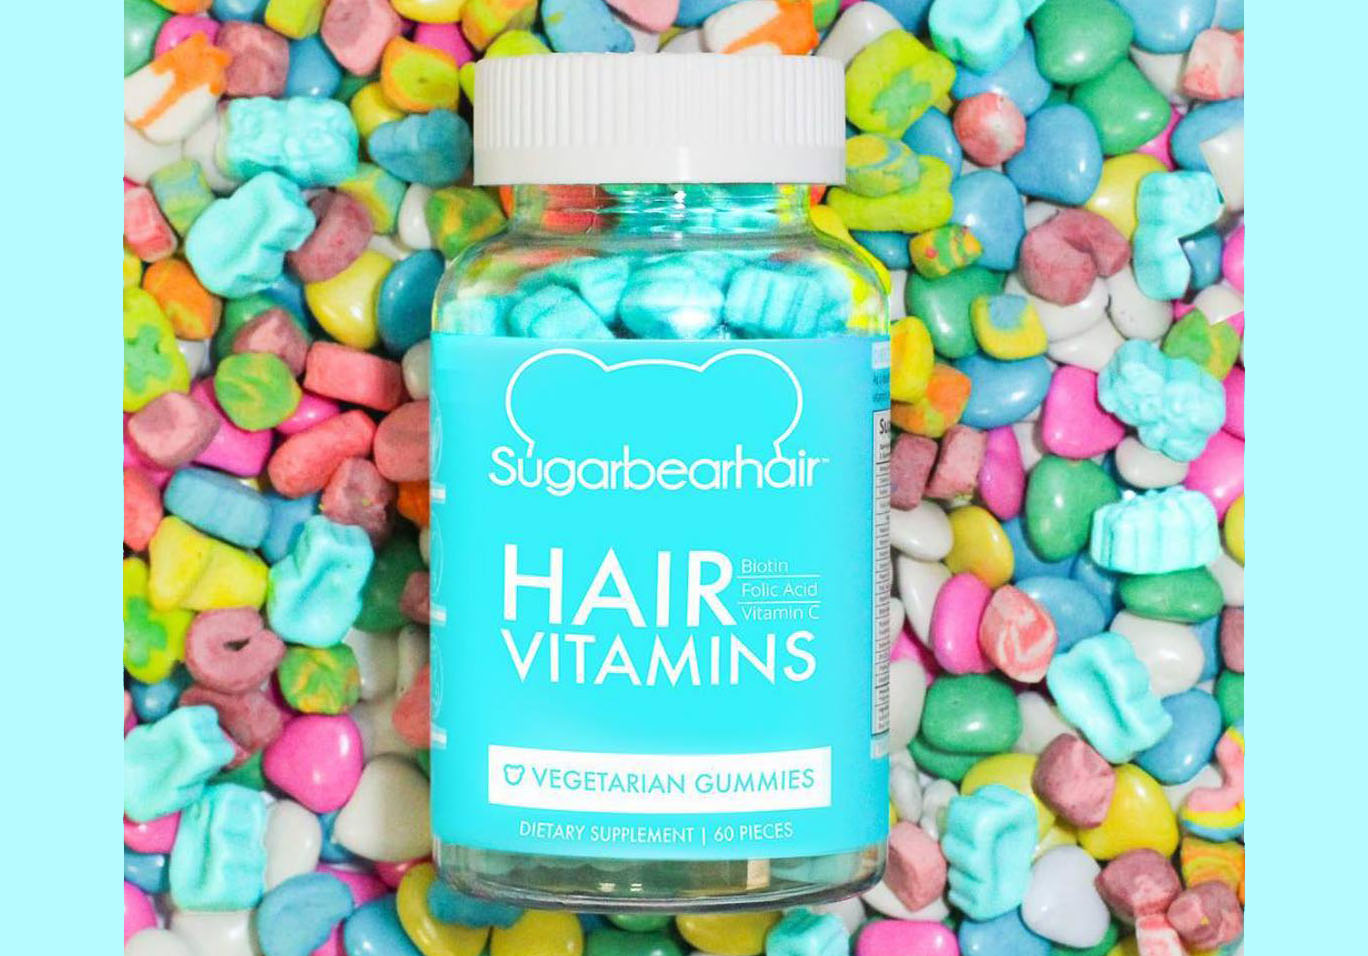 6. Blue Gummies for Hair Reviews: Ingredients and Benefits - wide 9